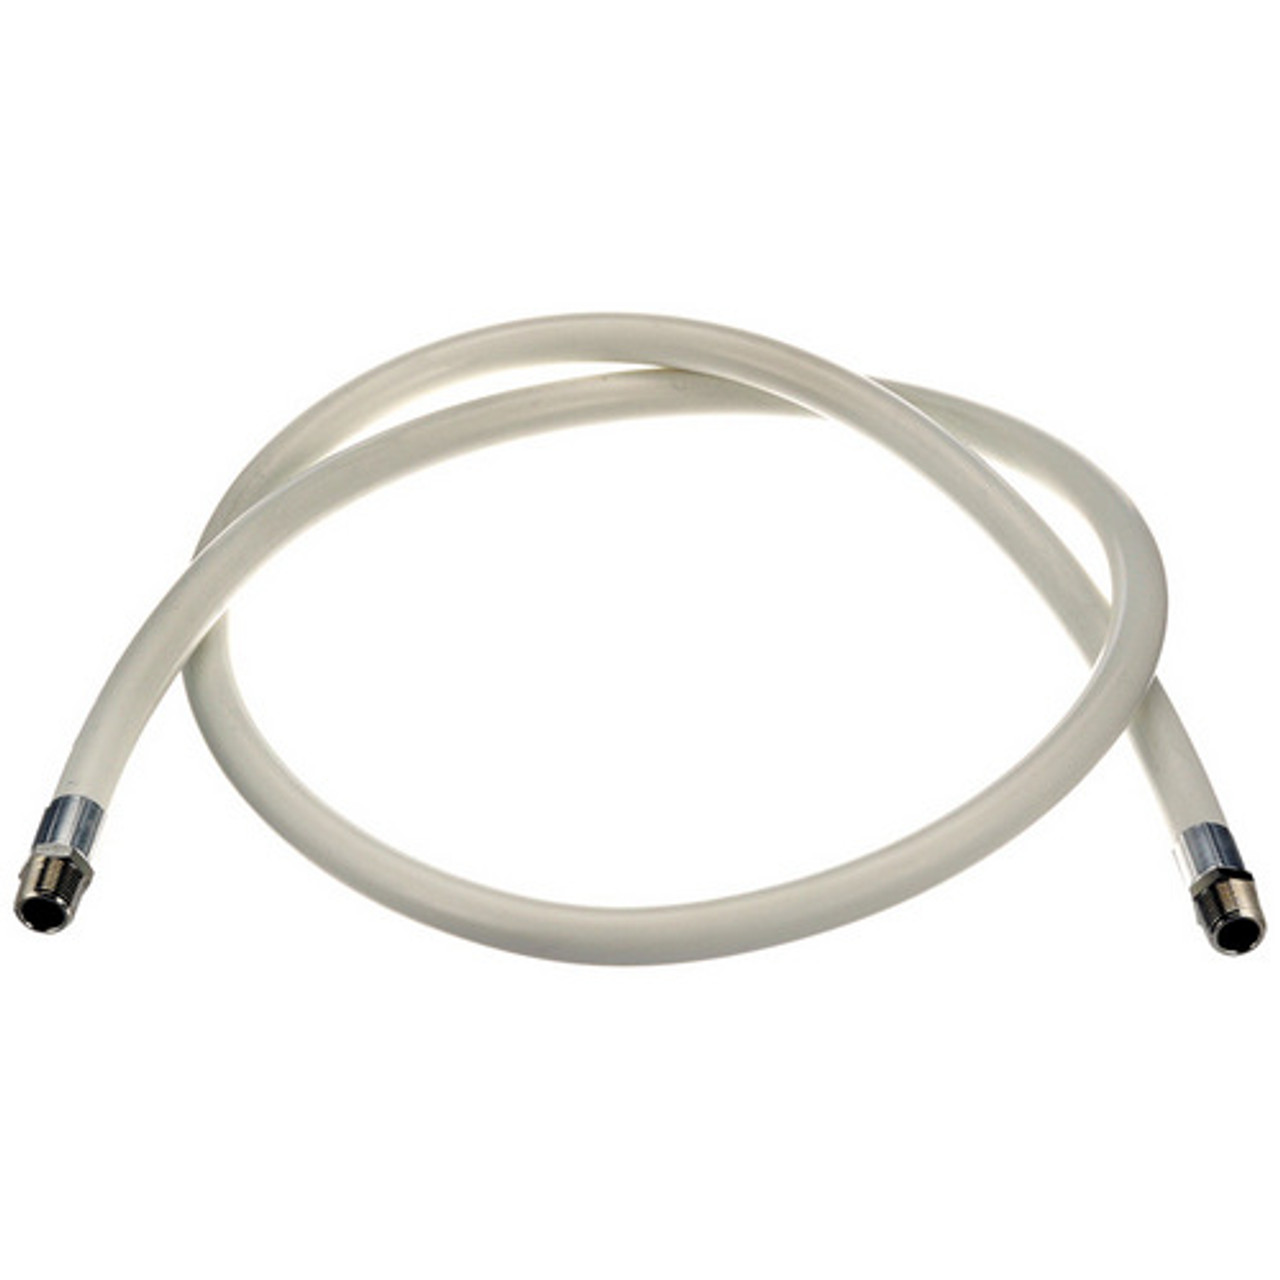 Filter Hose - Replacement Part For Hunter HF05060